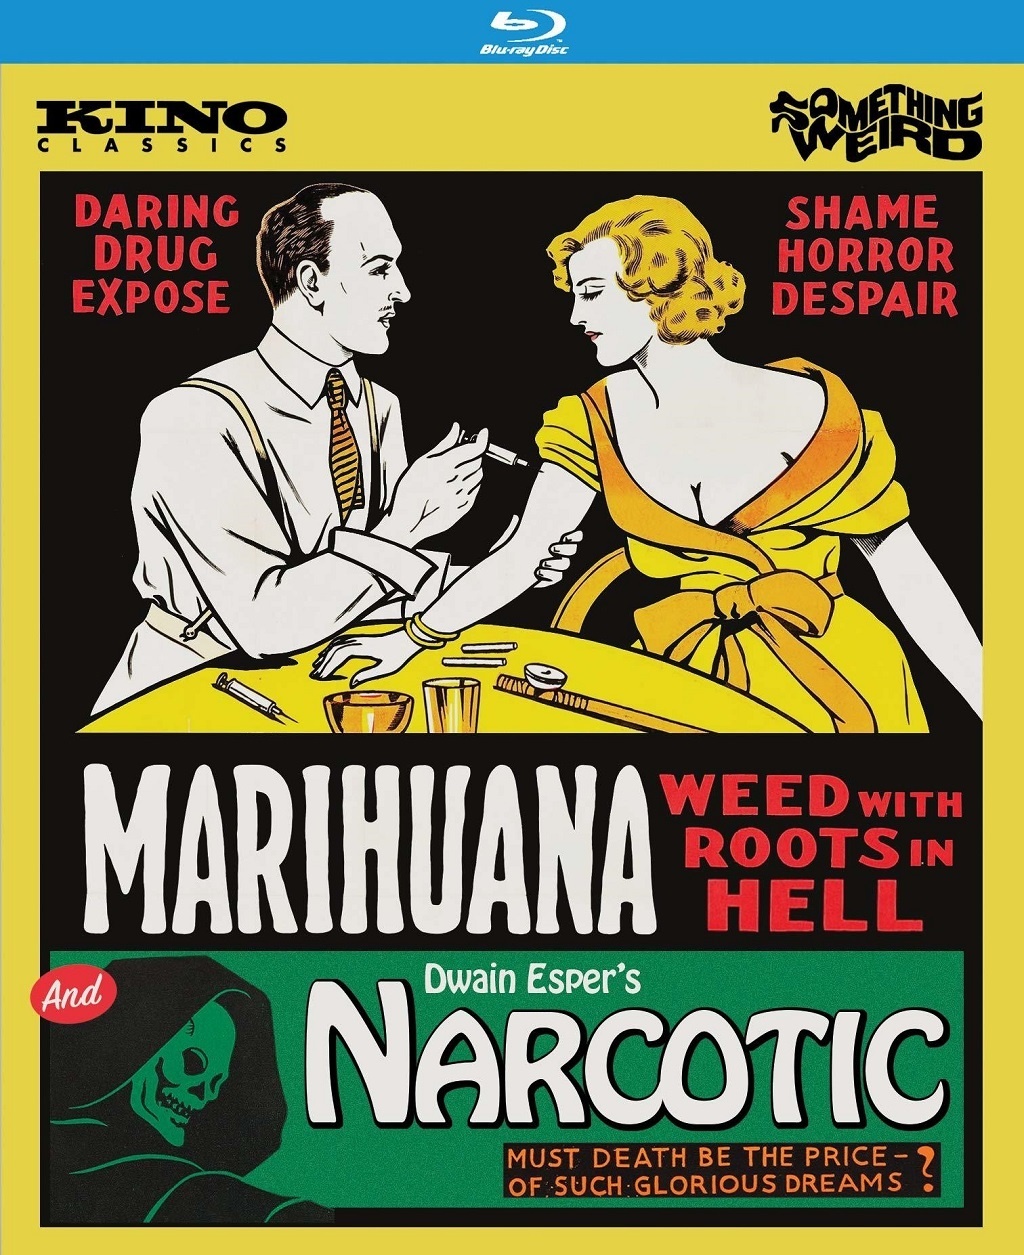 Marihuana the weed with roots in hell